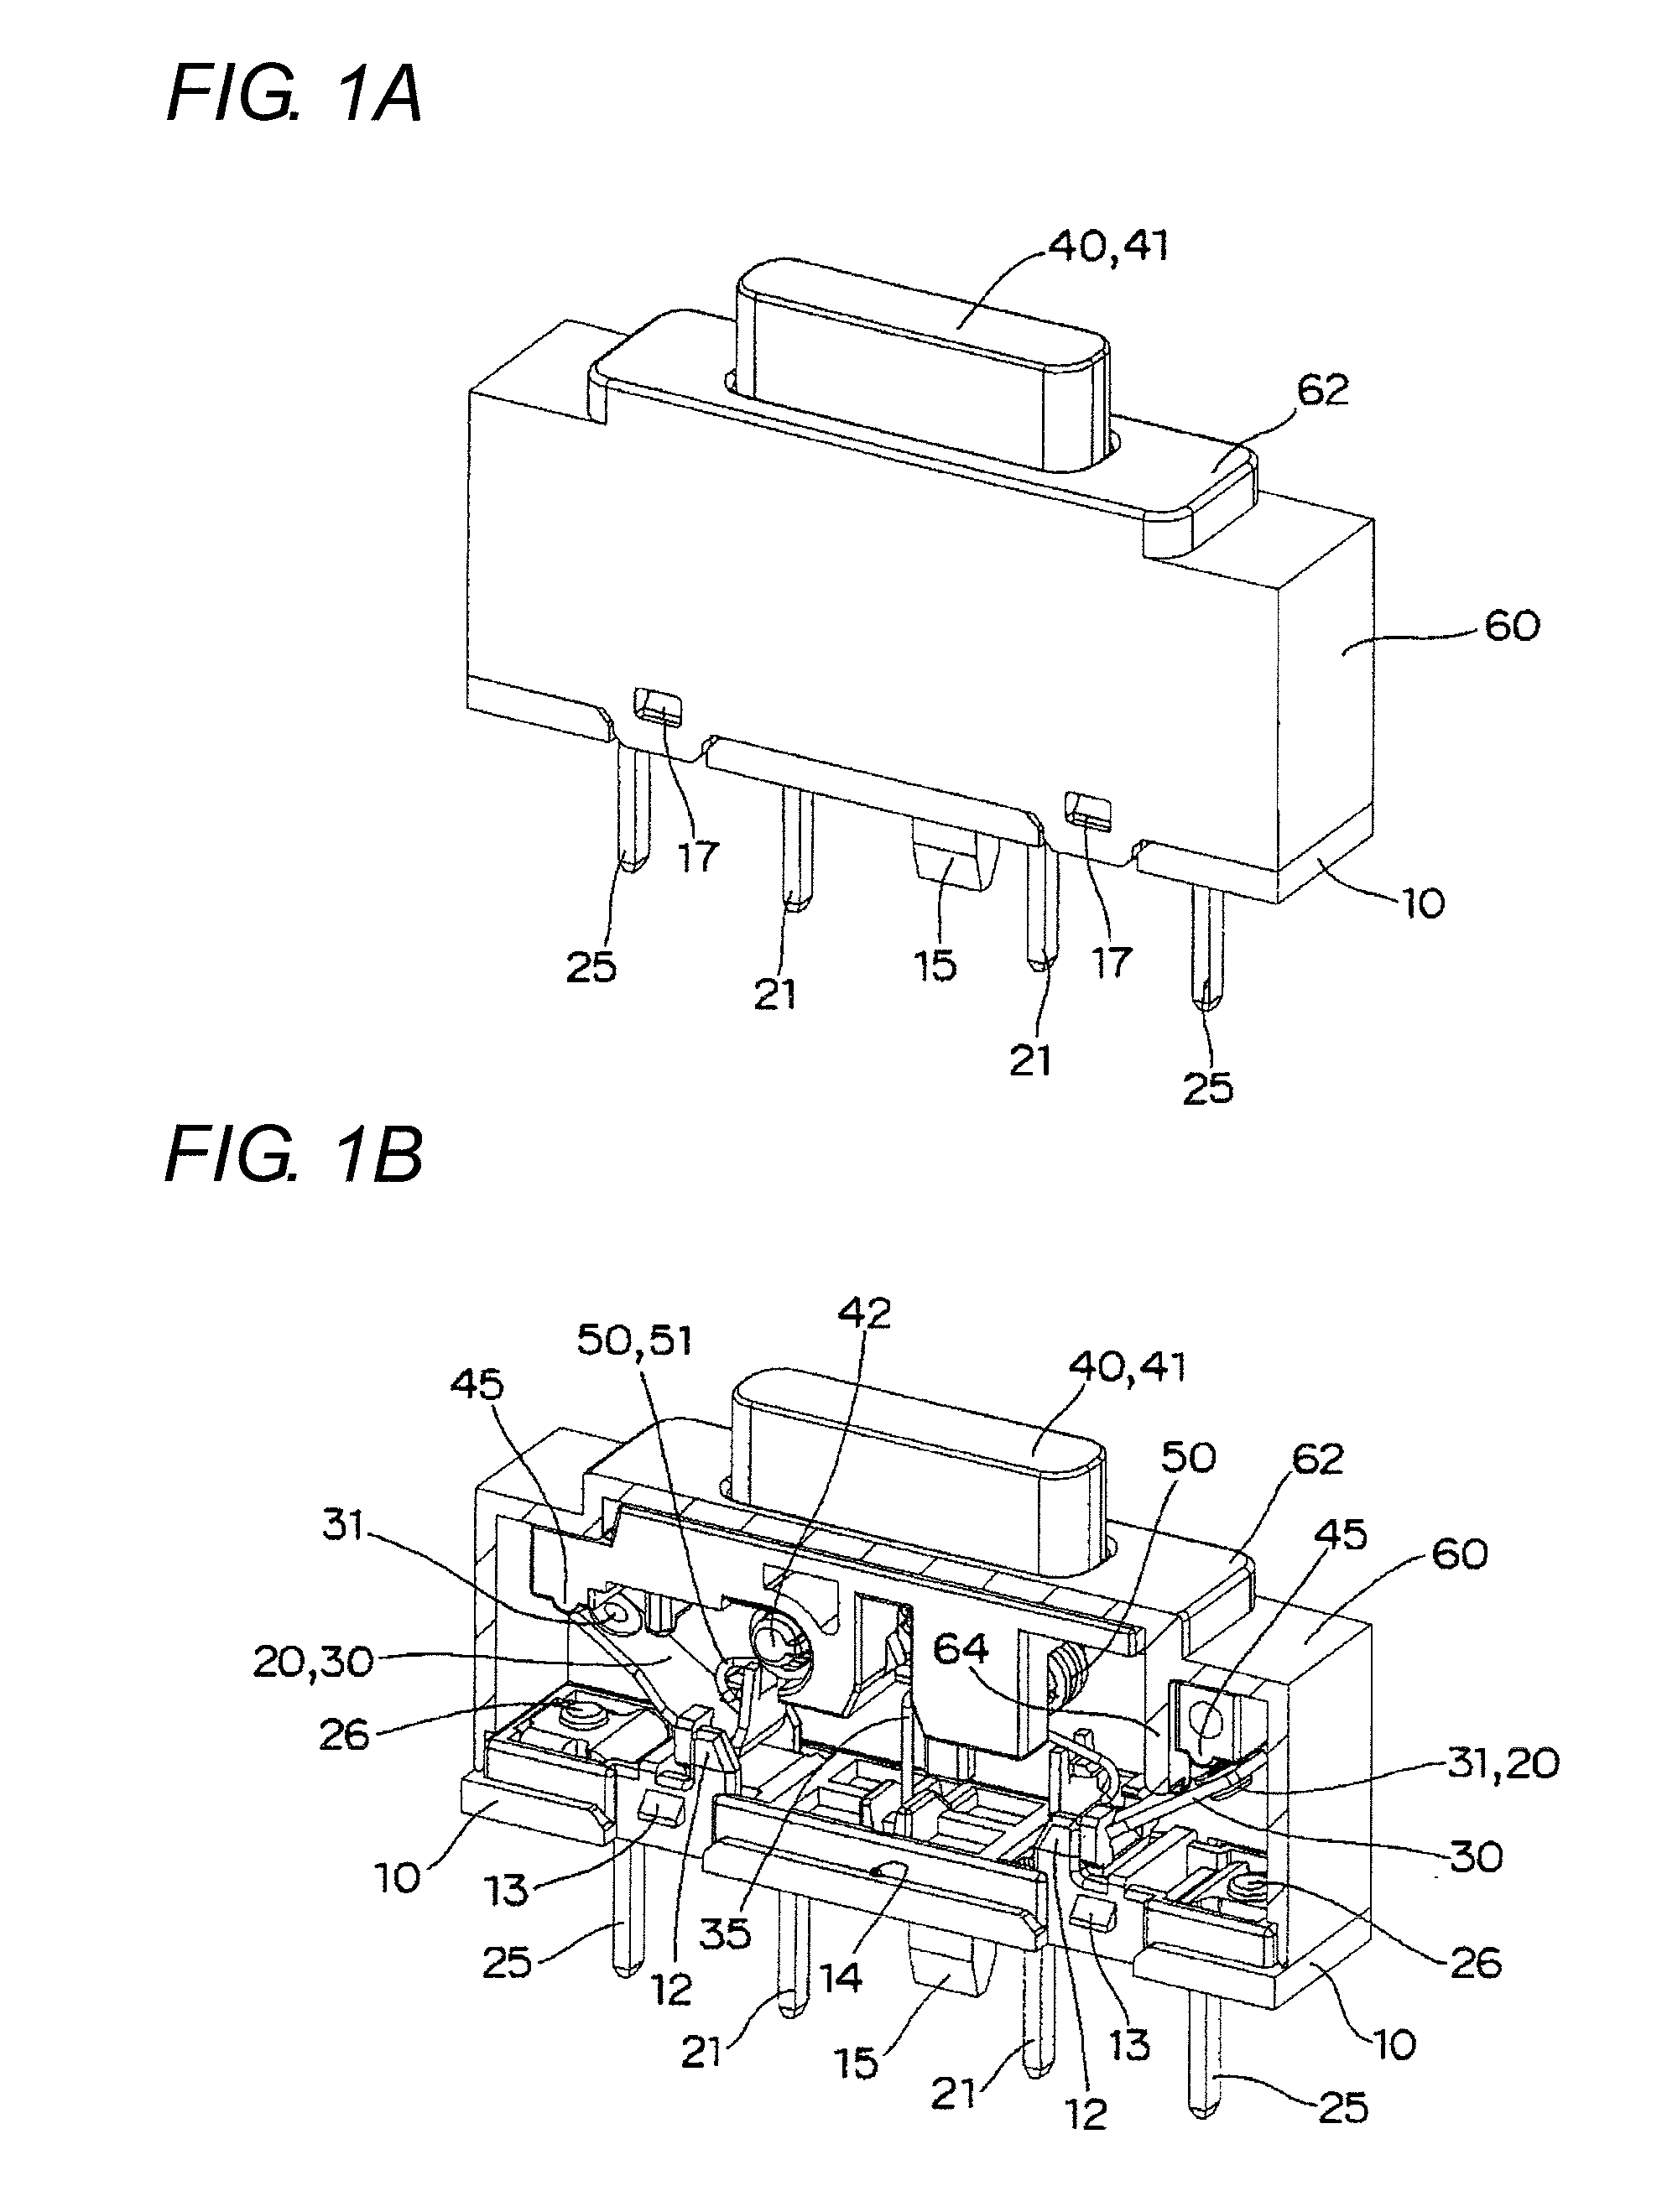 Switch having a plunger, a support terminal, and a coil spring